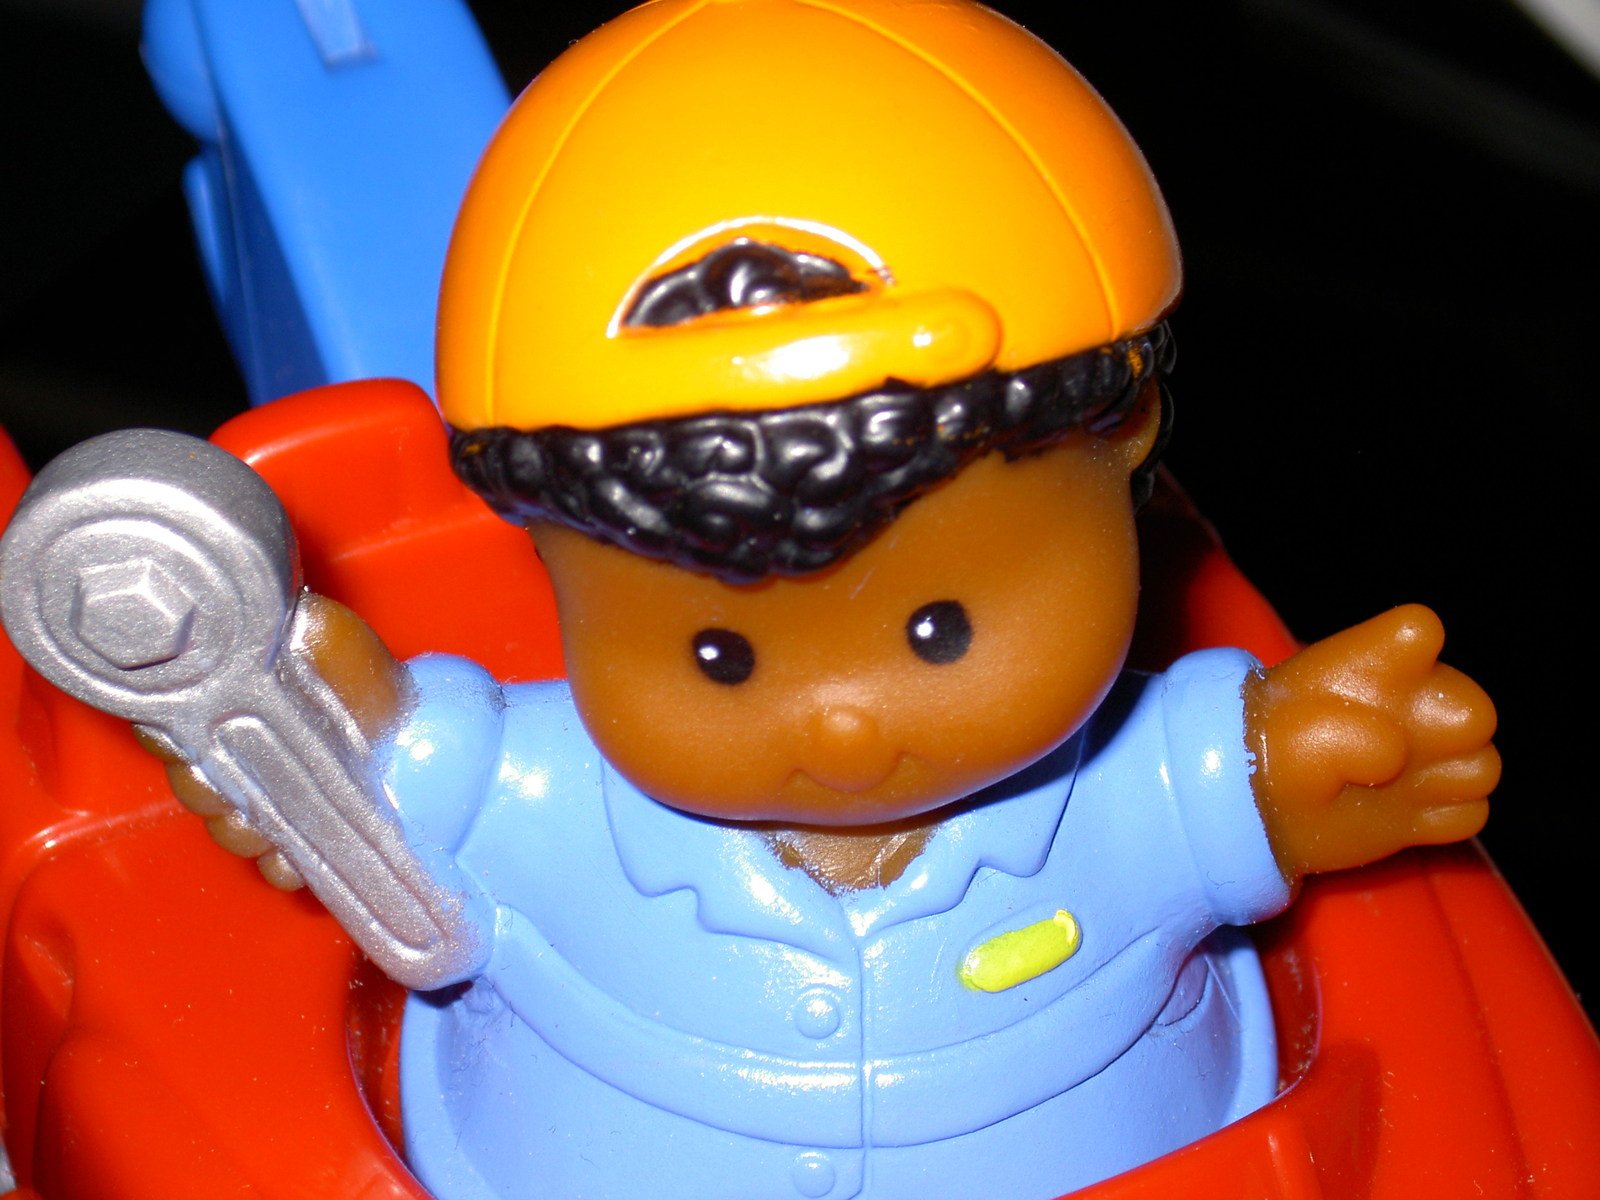 an orange toy doll in safety gear holding a wrench